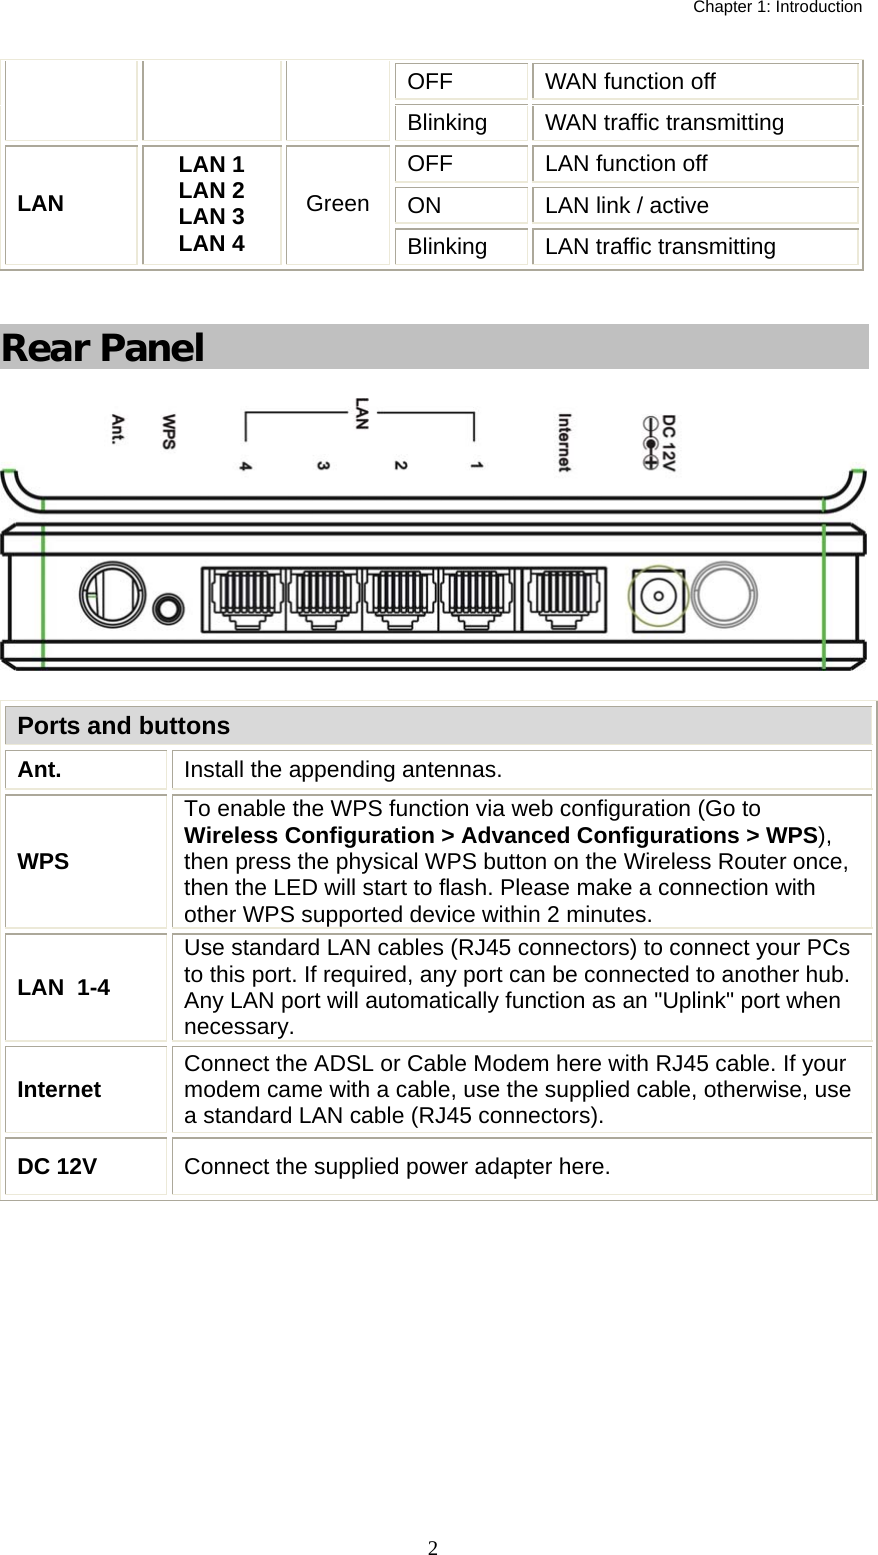   Chapter 1: Introduction  2OFF  WAN function off Blinking  WAN traffic transmitting OFF  LAN function off ON  LAN link / active LAN LAN 1 LAN 2 LAN 3 LAN 4 Green Blinking  LAN traffic transmitting  Rear Panel  Ports and buttons Ant.  Install the appending antennas. WPS  To enable the WPS function via web configuration (Go to Wireless Configuration &gt; Advanced Configurations &gt; WPS), then press the physical WPS button on the Wireless Router once, then the LED will start to flash. Please make a connection with other WPS supported device within 2 minutes.  LAN  1-4 Use standard LAN cables (RJ45 connectors) to connect your PCs to this port. If required, any port can be connected to another hub. Any LAN port will automatically function as an &quot;Uplink&quot; port when necessary. Internet  Connect the ADSL or Cable Modem here with RJ45 cable. If your modem came with a cable, use the supplied cable, otherwise, use a standard LAN cable (RJ45 connectors). DC 12V  Connect the supplied power adapter here.  